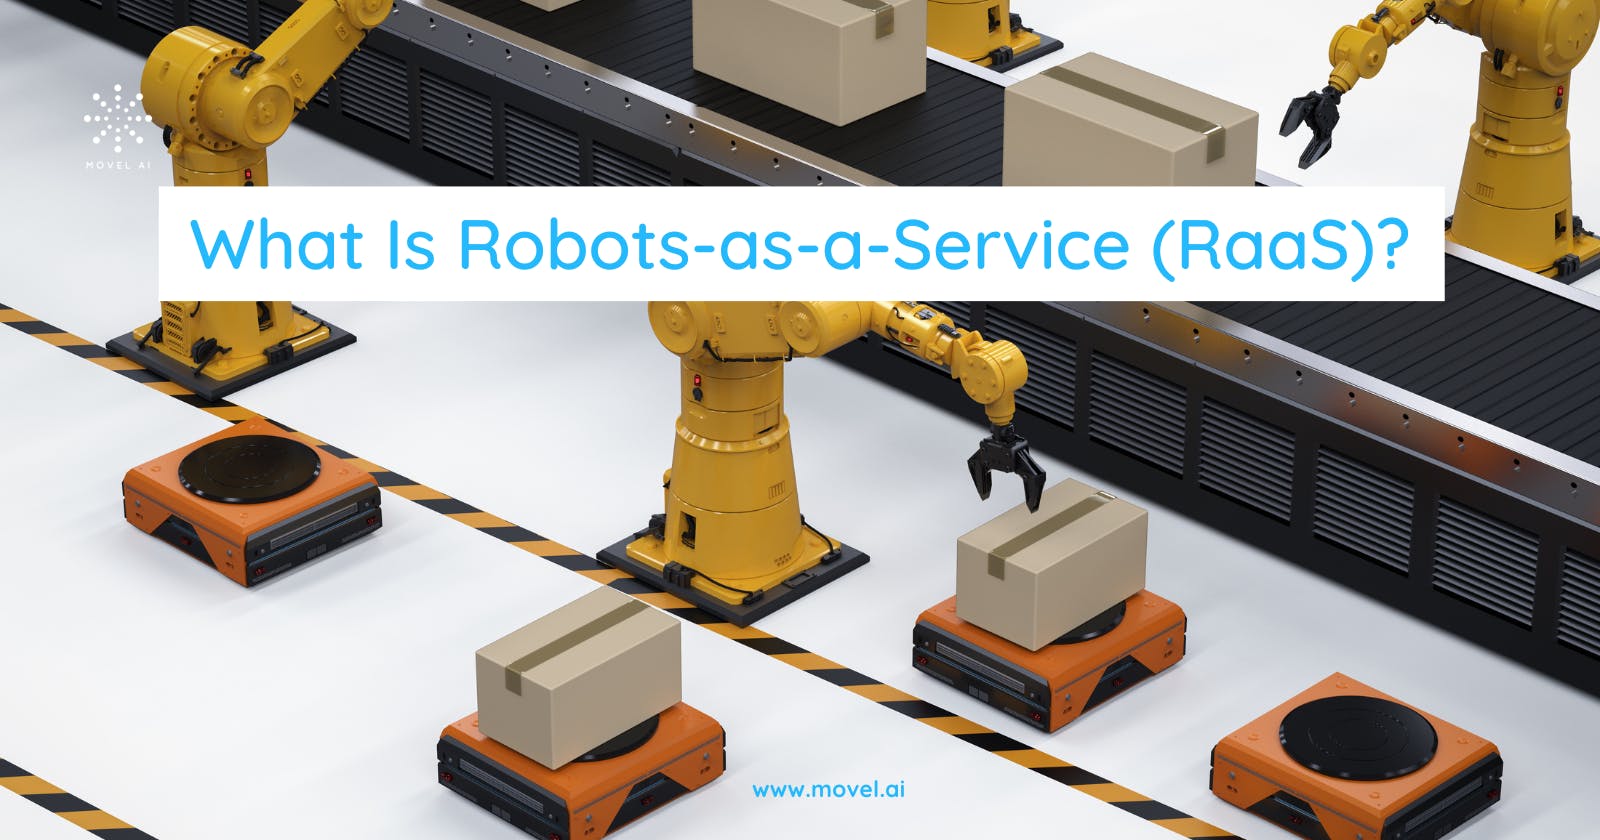 What Is Robots-as-a-Service (RaaS)?